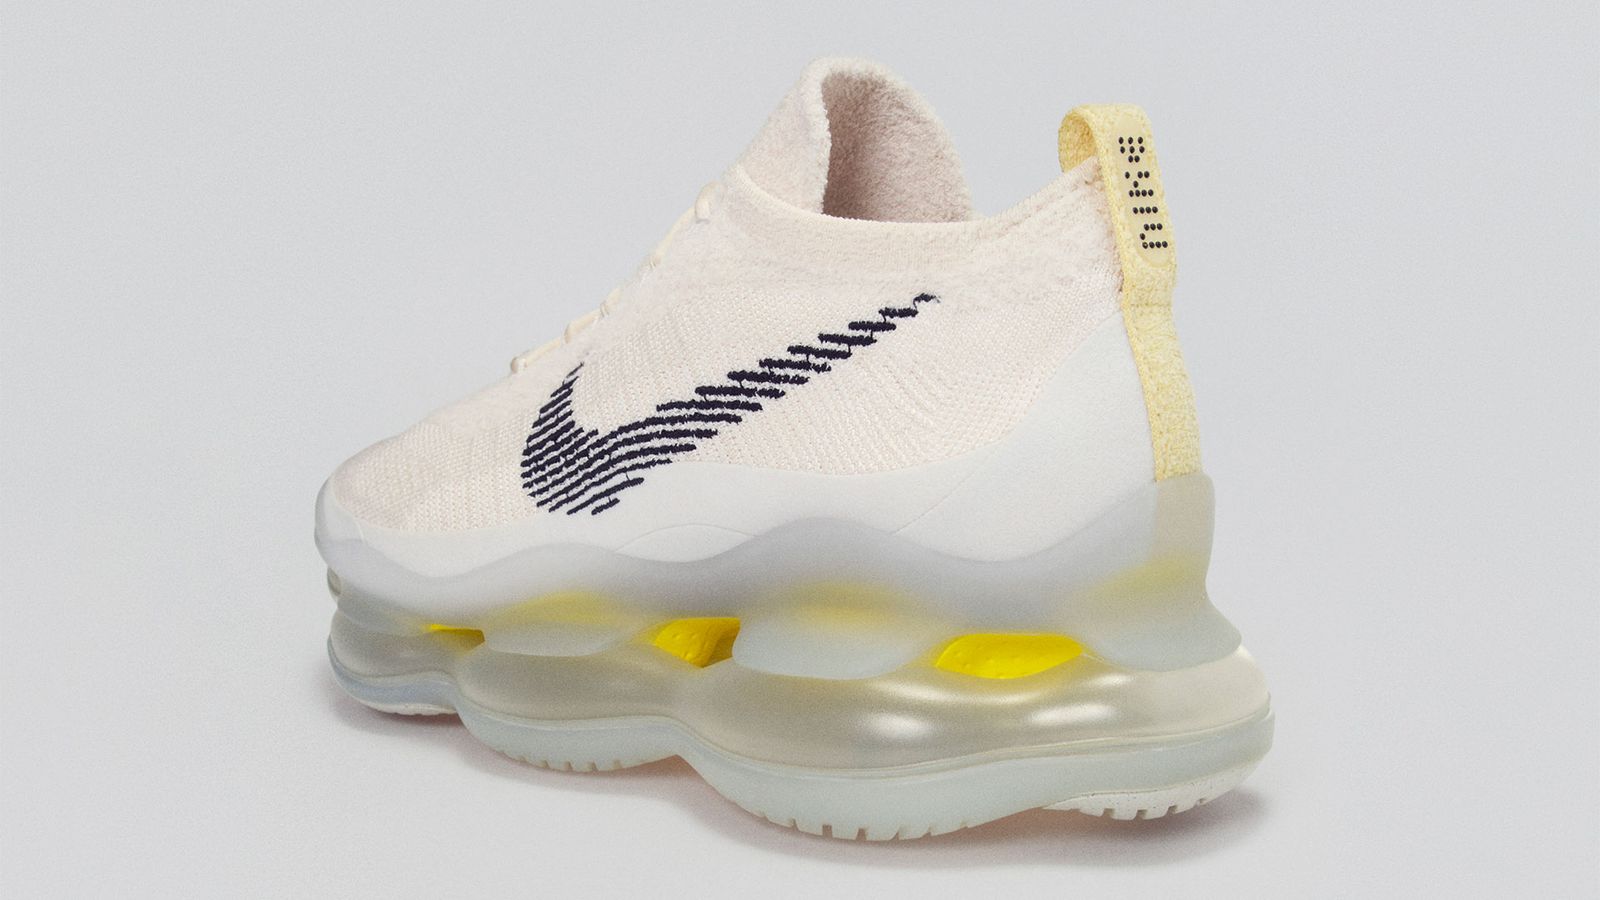 Nike Air Zoom Scorpion product image of a light cream sneaker with large, translucent airbag midsoles.